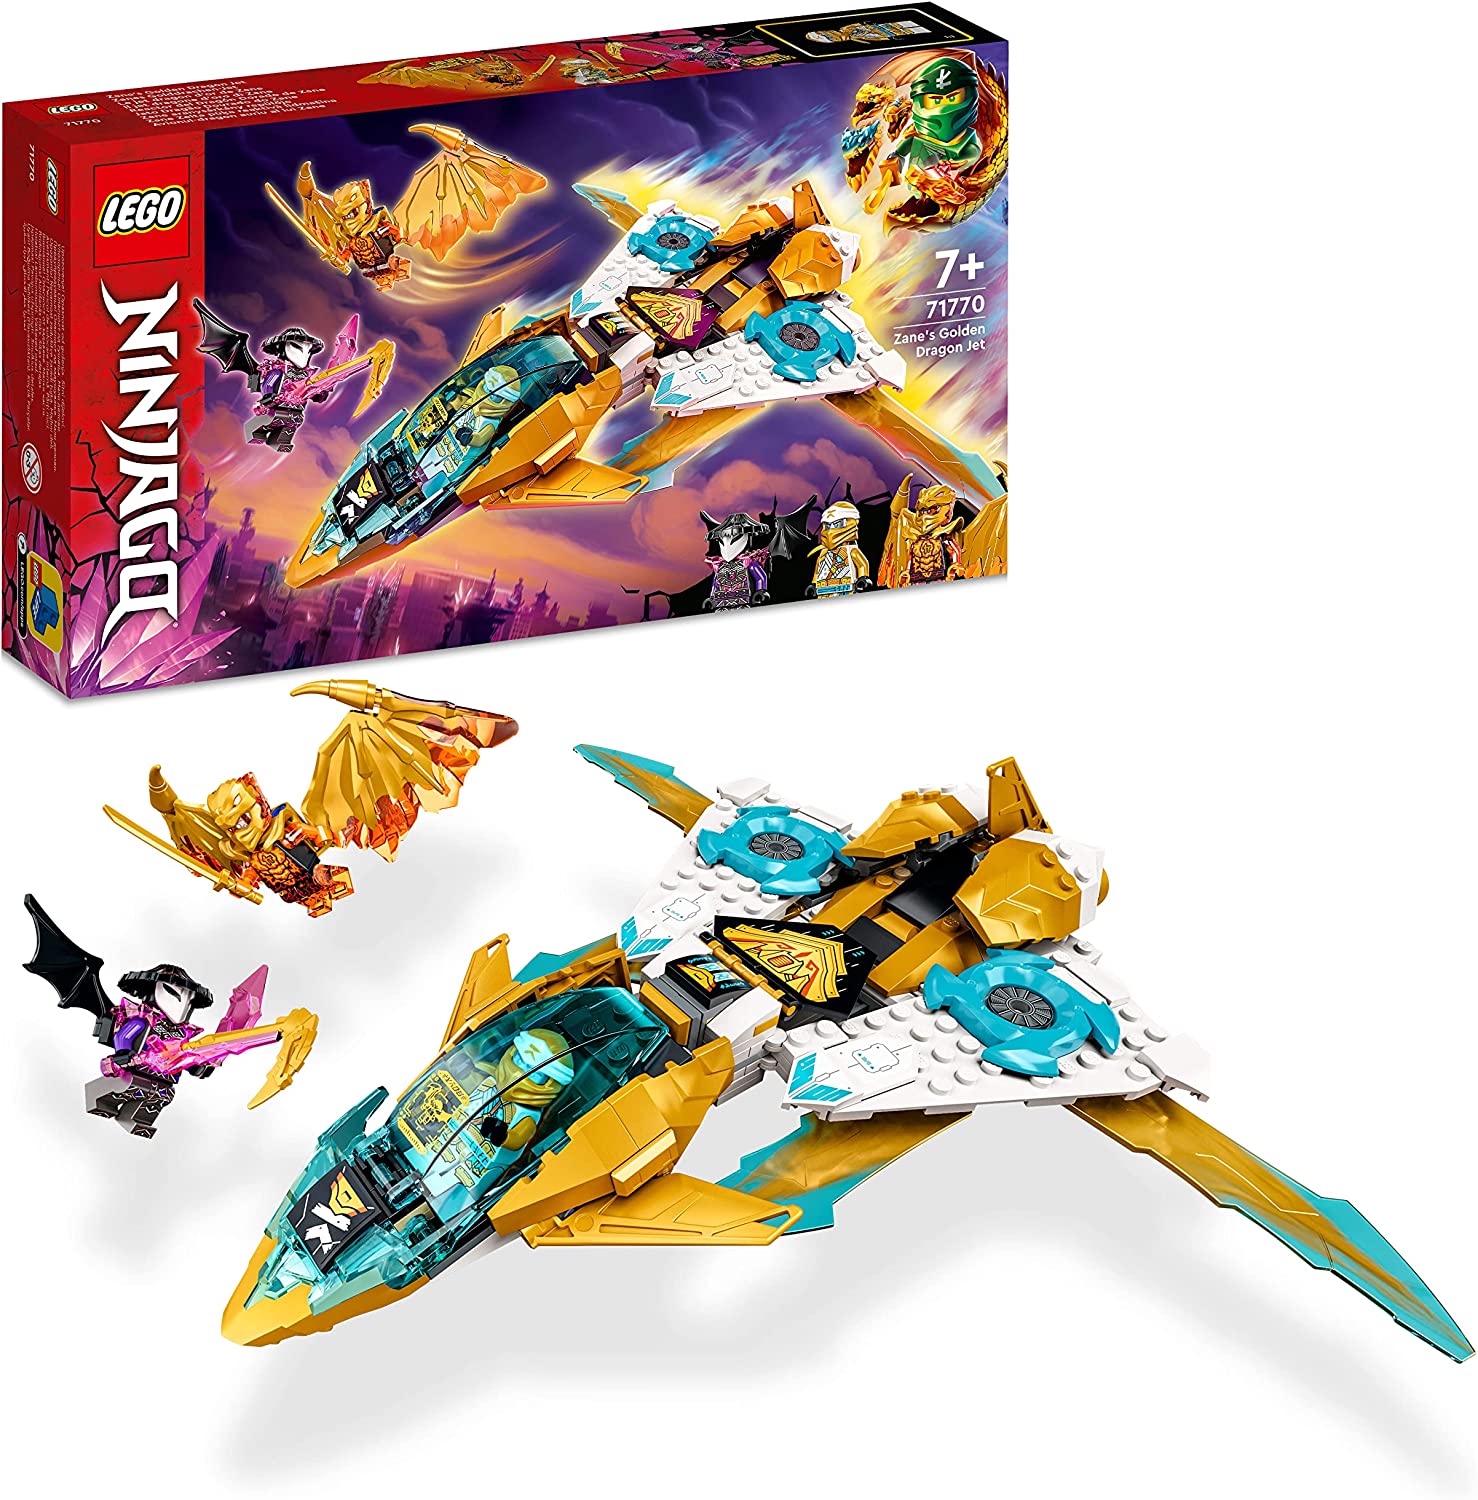 LEGO 71770 NINJAGO Zanes Gold Dragon Jet Set with Toy Plane and Cole & Zane Mini Figures, Great Birthday Gift for Children from 7 Years